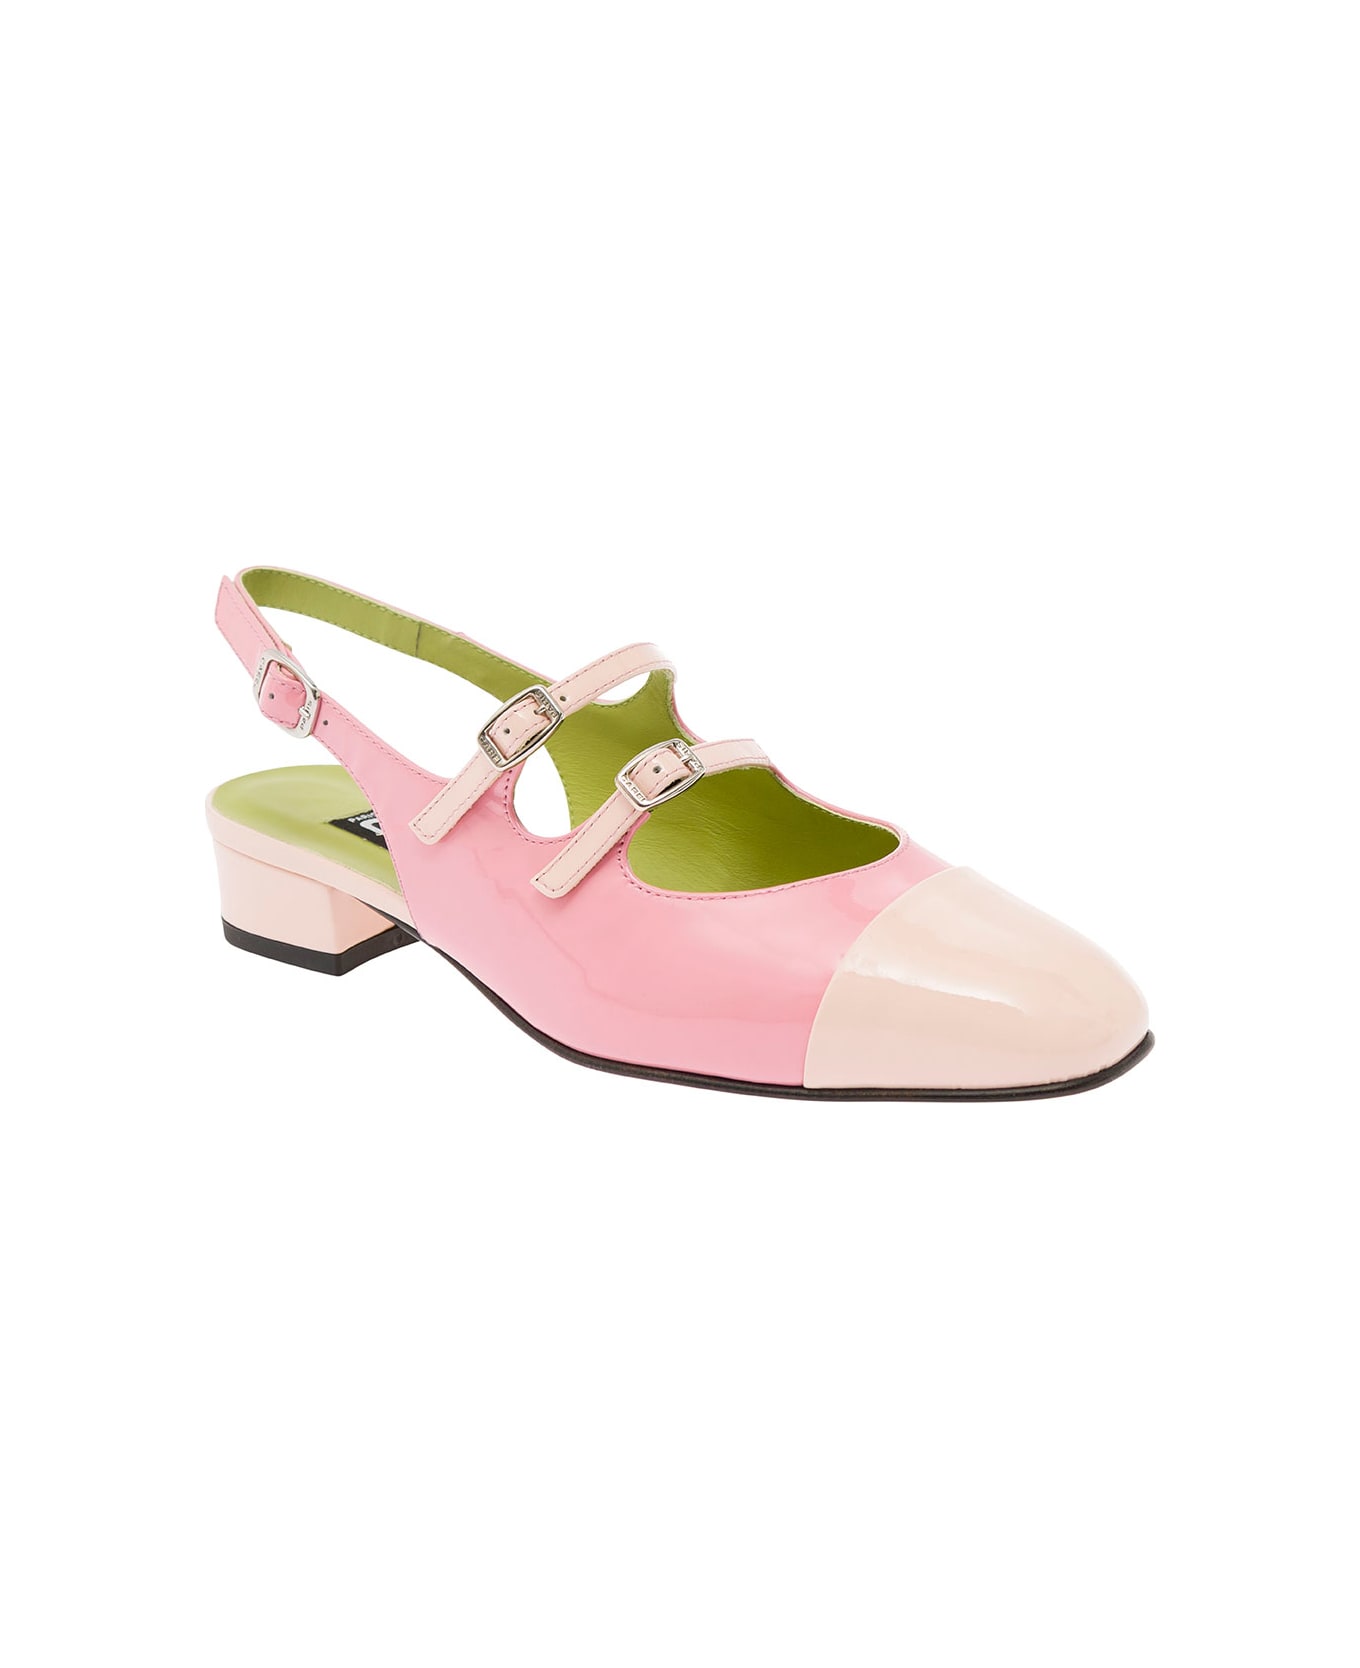 Carel 'abricot' Pink Slingback Mary Janes With Contrasting Toe In Leather Woman - Pink ハイヒール